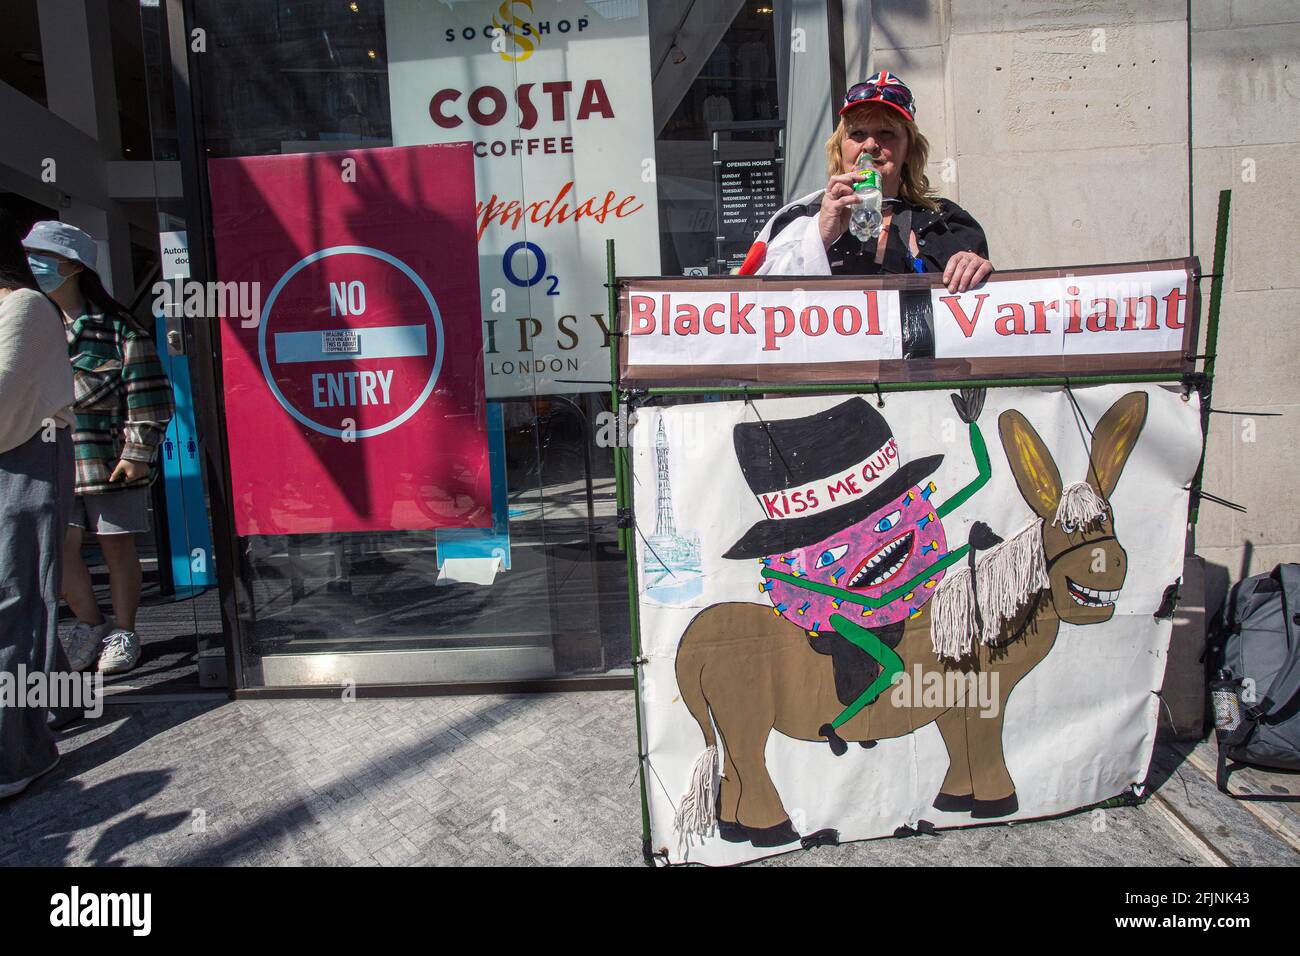 April 24, 2021, London, England, United Kingdom:  A woman holds a sign “Blackpool Variant .” during an anti-lockdown 'Unite for Freedom' protest in Lo Stock Photo